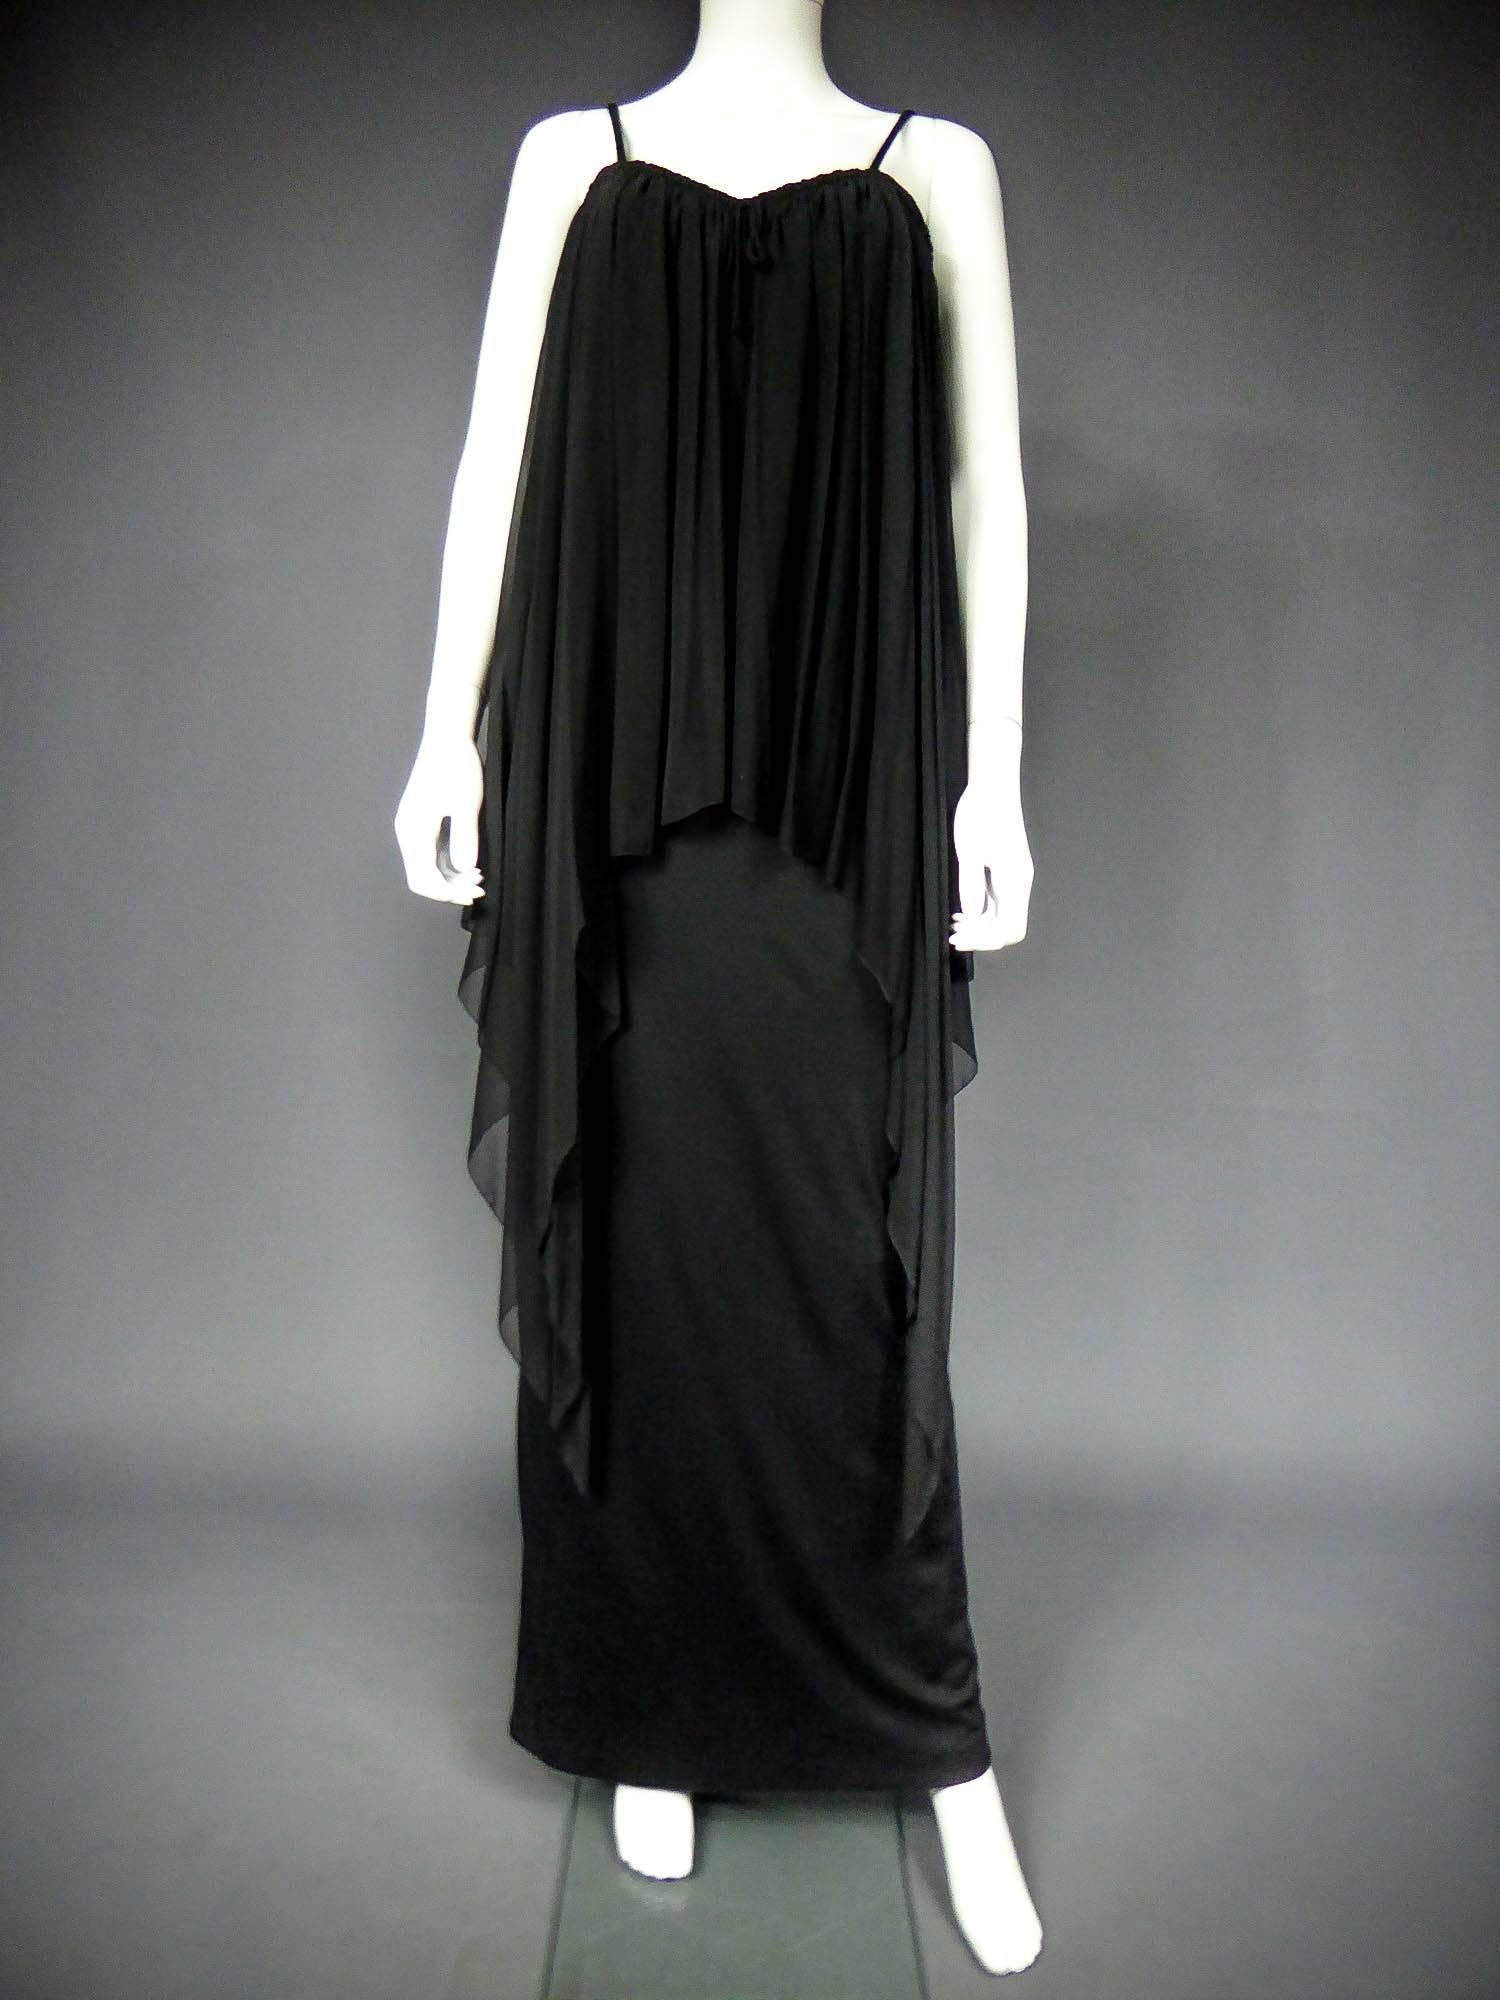 Circa 1975

France

Long bat dress in jersey and silk muslin tightened at the chest by a tie. Sleeveless low-cut neckline retained by fine matching straps. Huge asymmetrical triangle with a pointed cut in bias and hands finishes. Cape effect